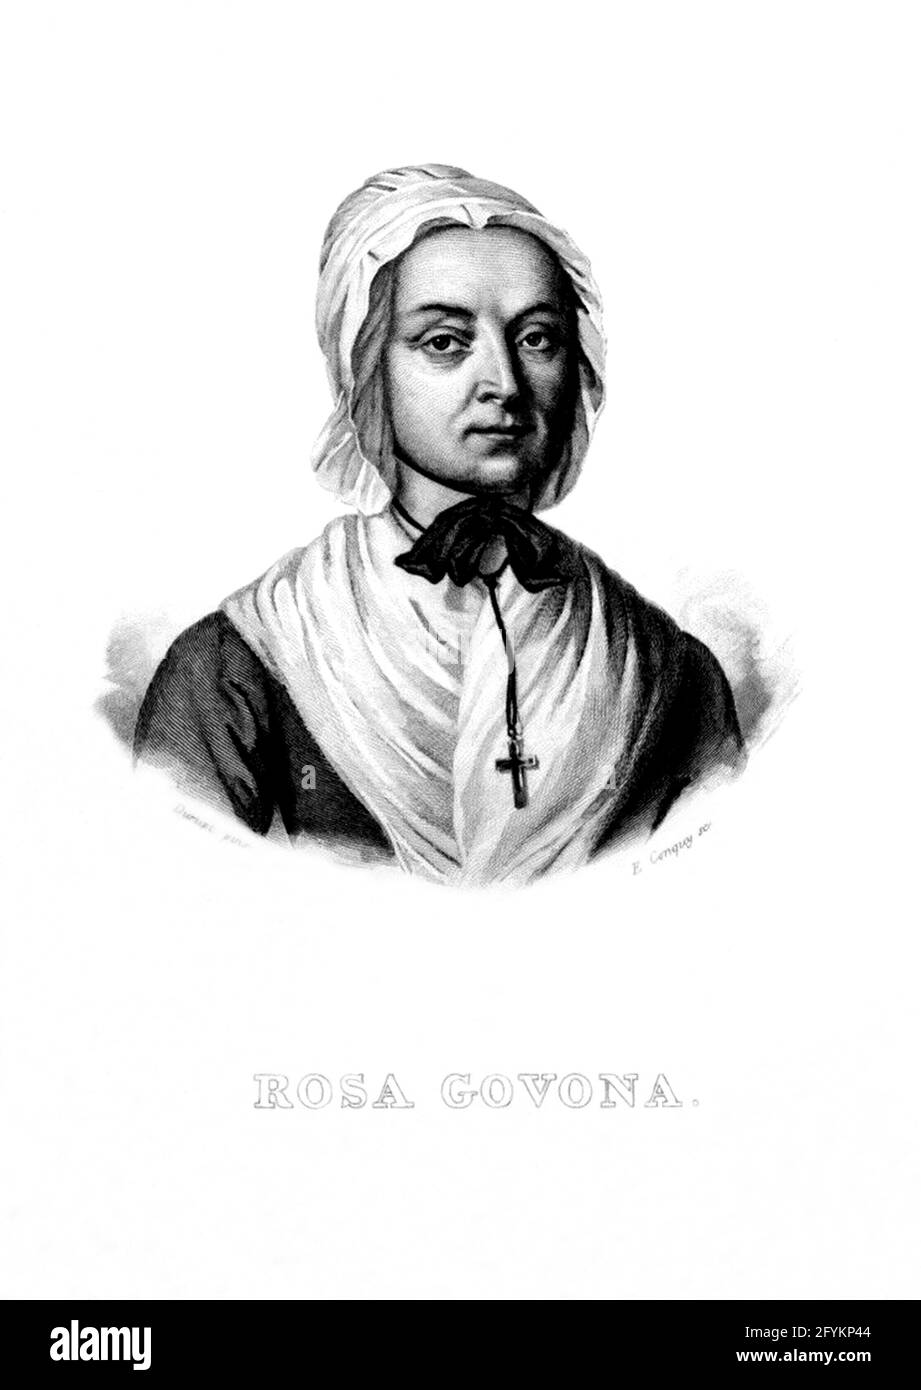 1770 ca , ITALY : The italian rich philanthropist ROSA GOVONA ( 1716 - 1777 ) . In 1742 he opened his house to some orphan girls or from very poor families and to some street girls and instructed them to work by introducing them to the Christian faith . Portrait engraved by E. Congraj, pubblished in 1835 .- RELIGIONE CATTOLICA - CATHOLIC RELIGION - portrait - ritratto - filantropo - filantropa - FILANTROPIA - Roman Catholic Church ---  Archivio GBB Stock Photo